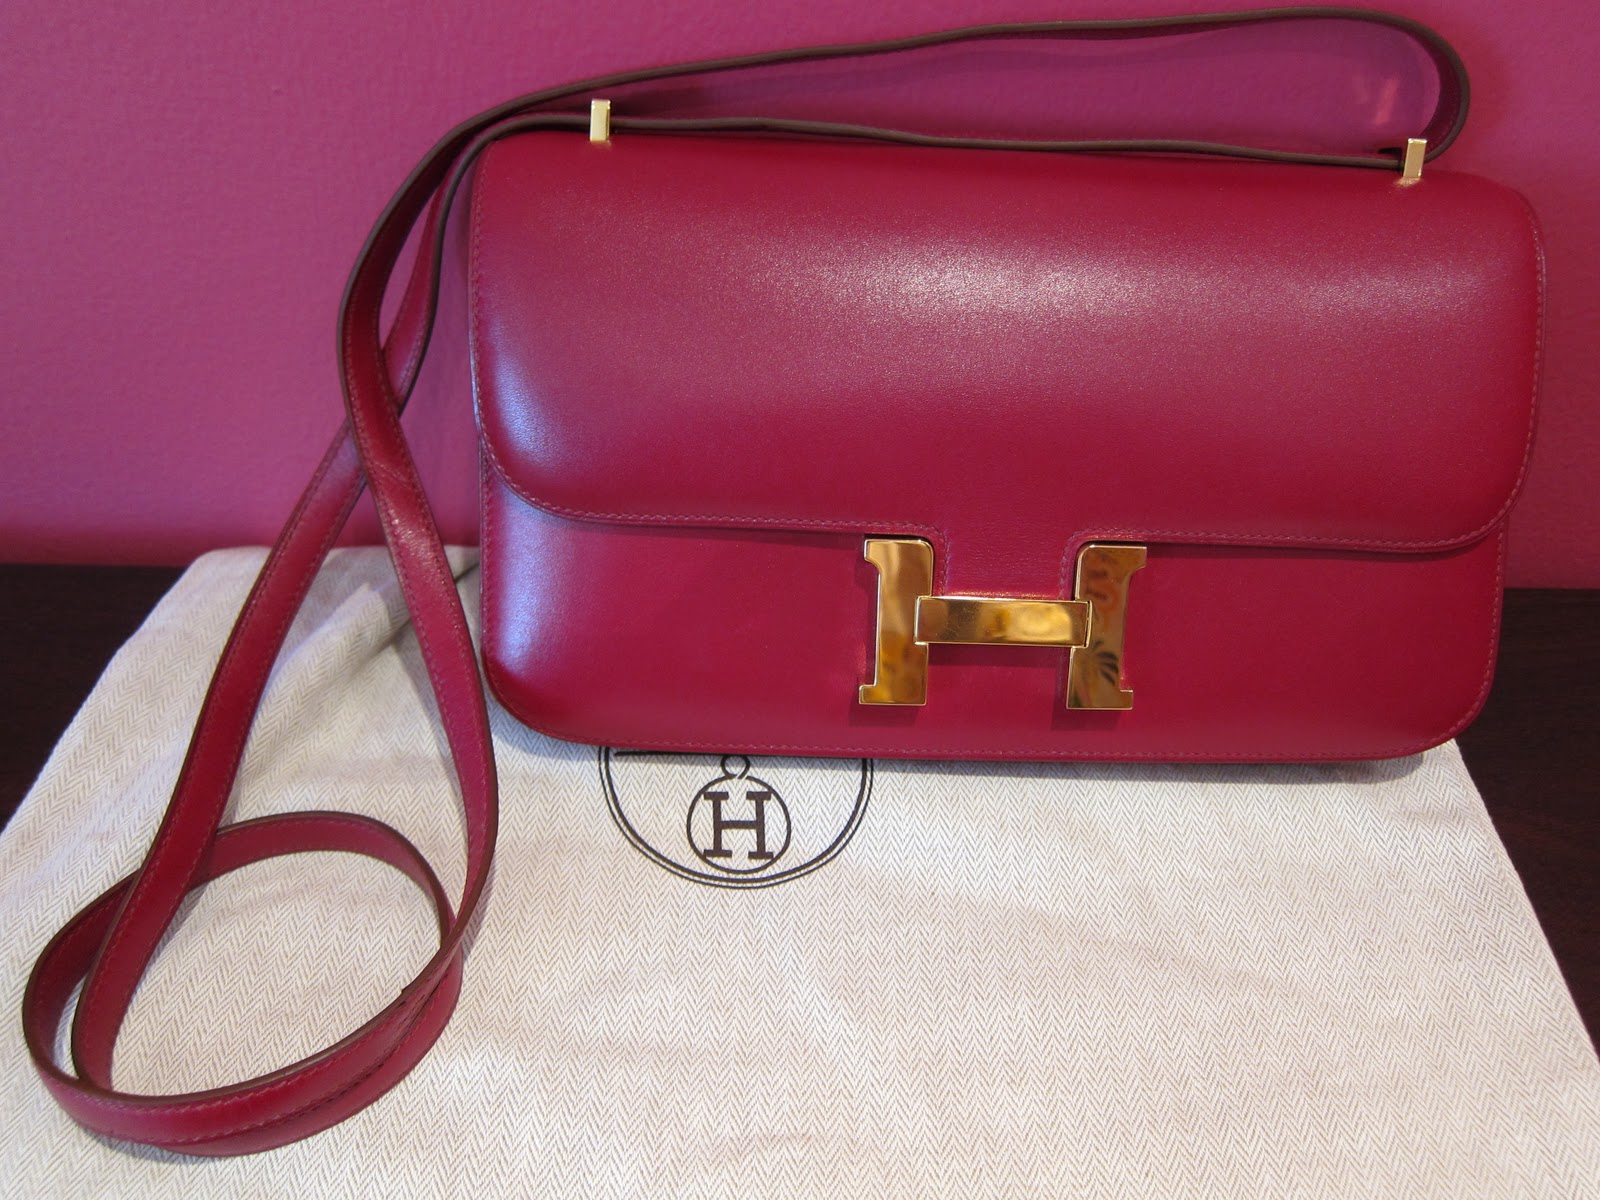 Simply Vintage: Brand NEW Hermes constance bags